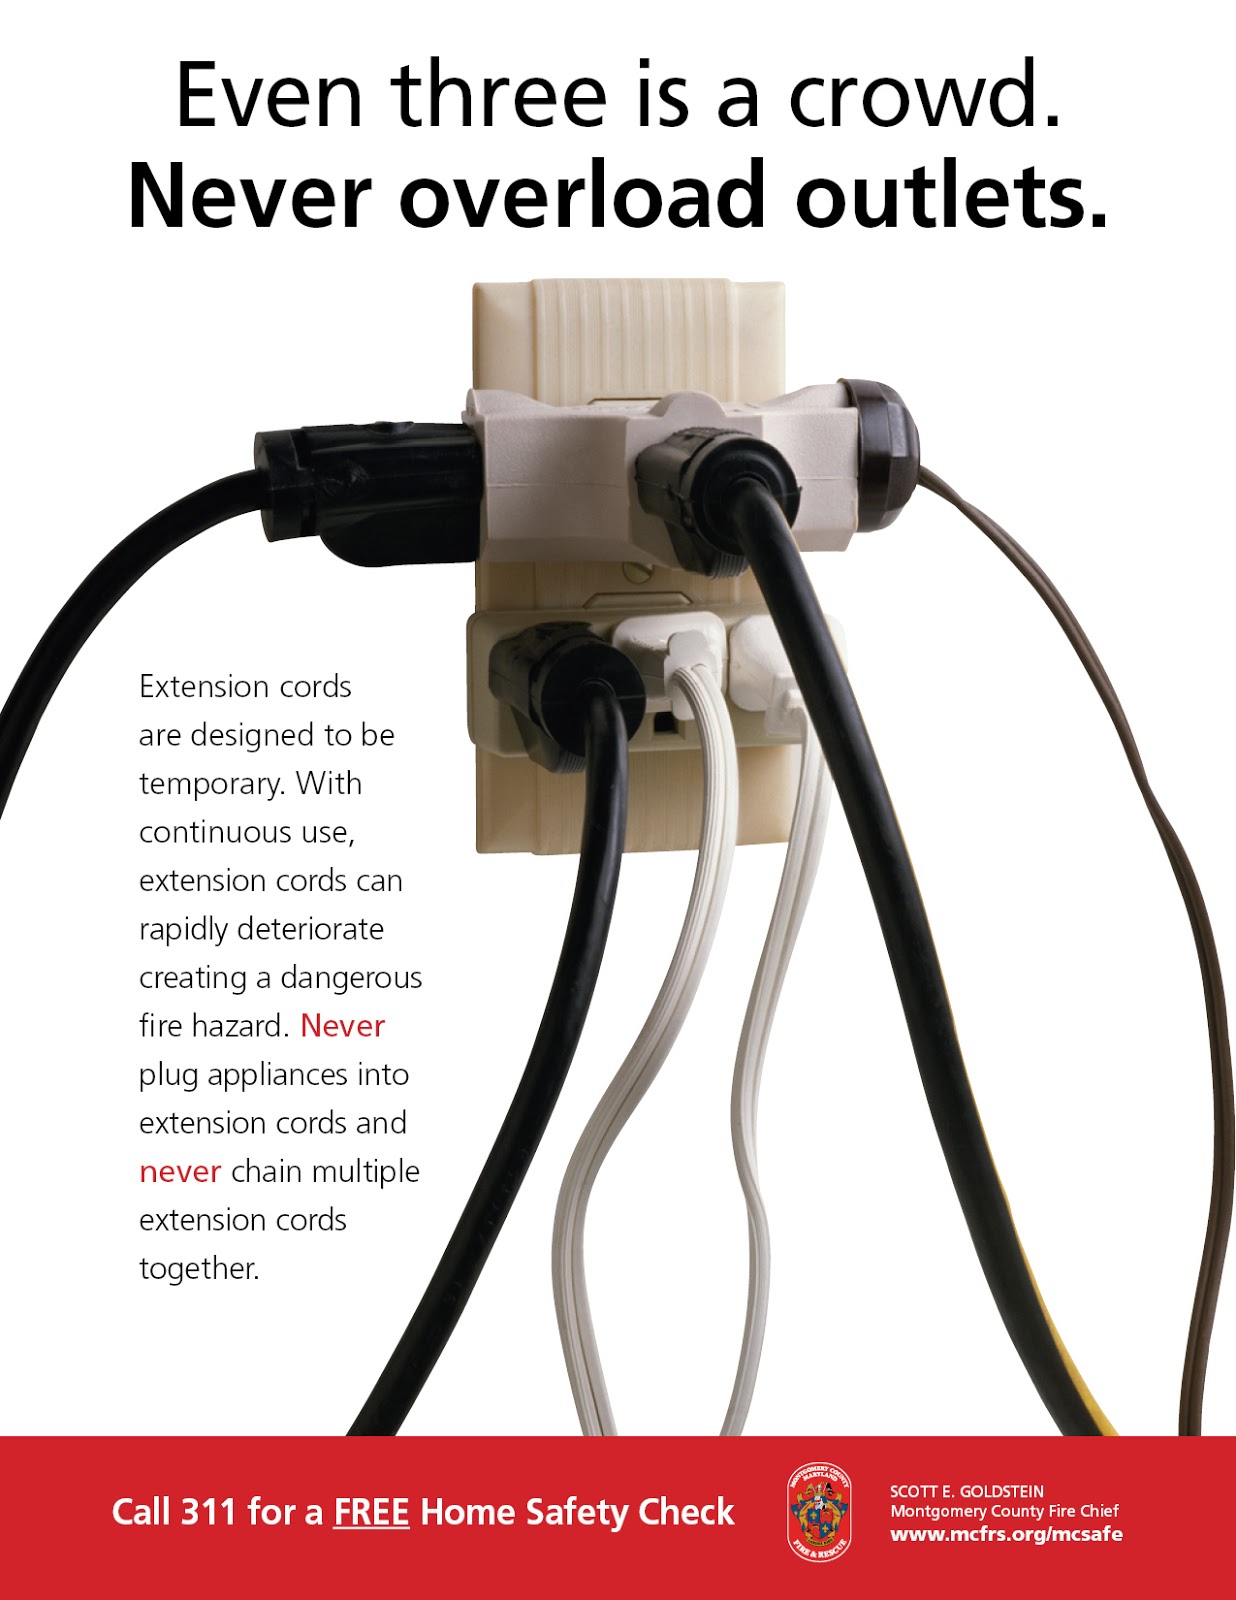 Eight Things Never to Do With an Extension Cord